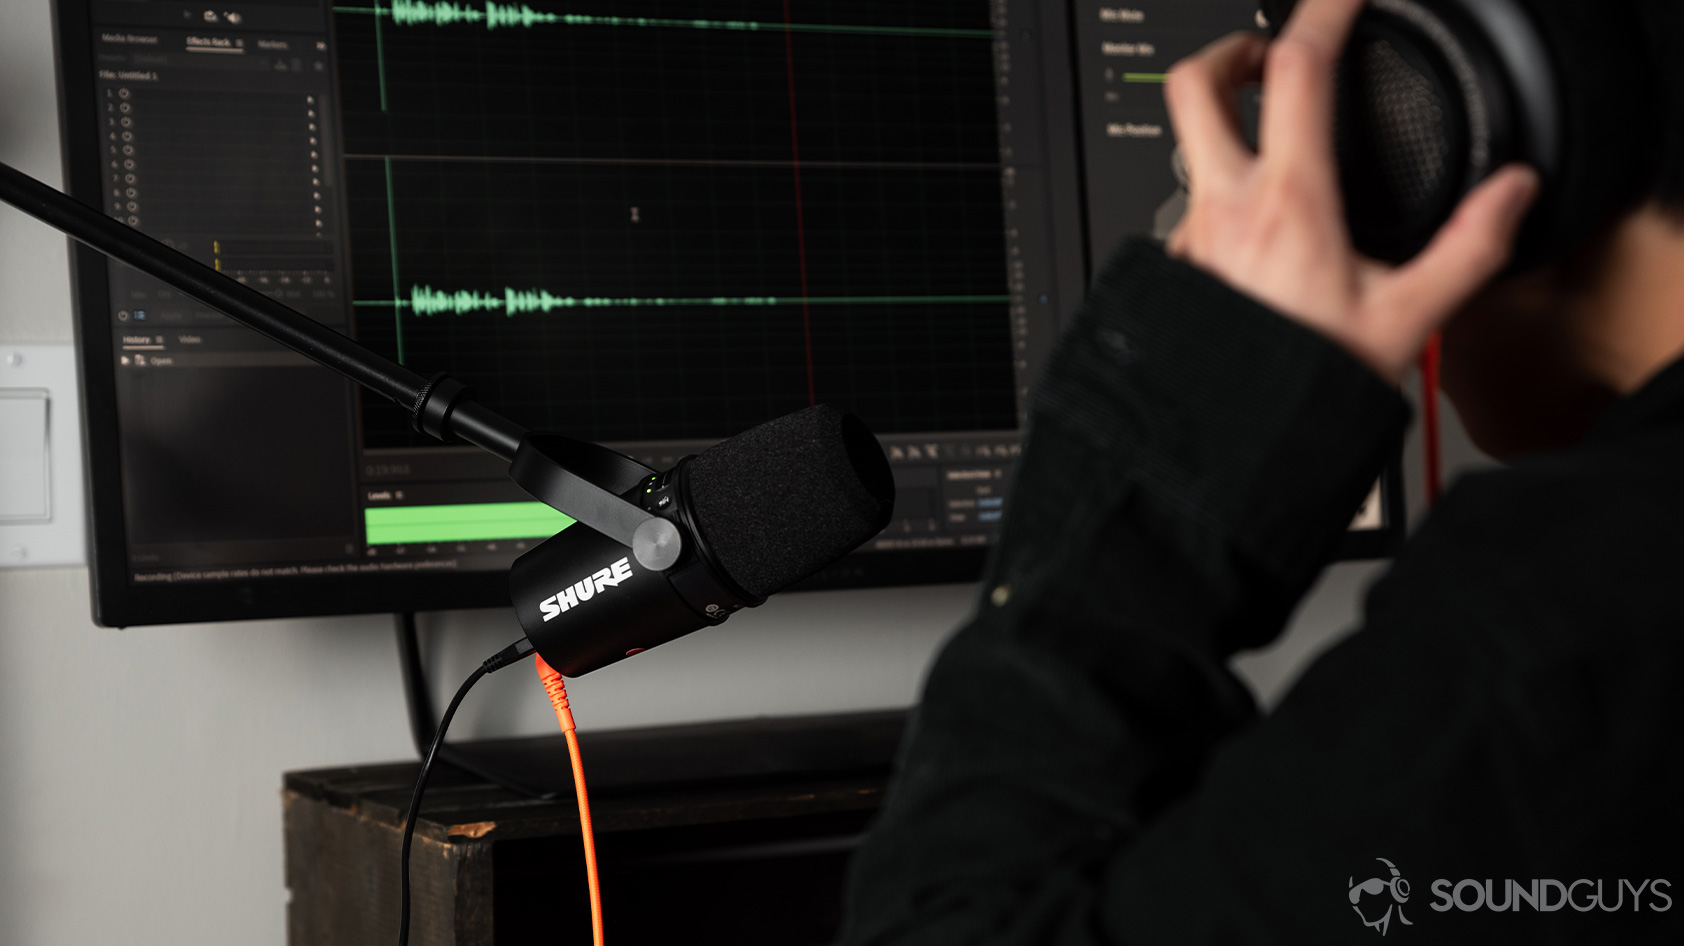 A person uses the Shure MV7 USB microphone and adjusts headphones as she monitors the recording.